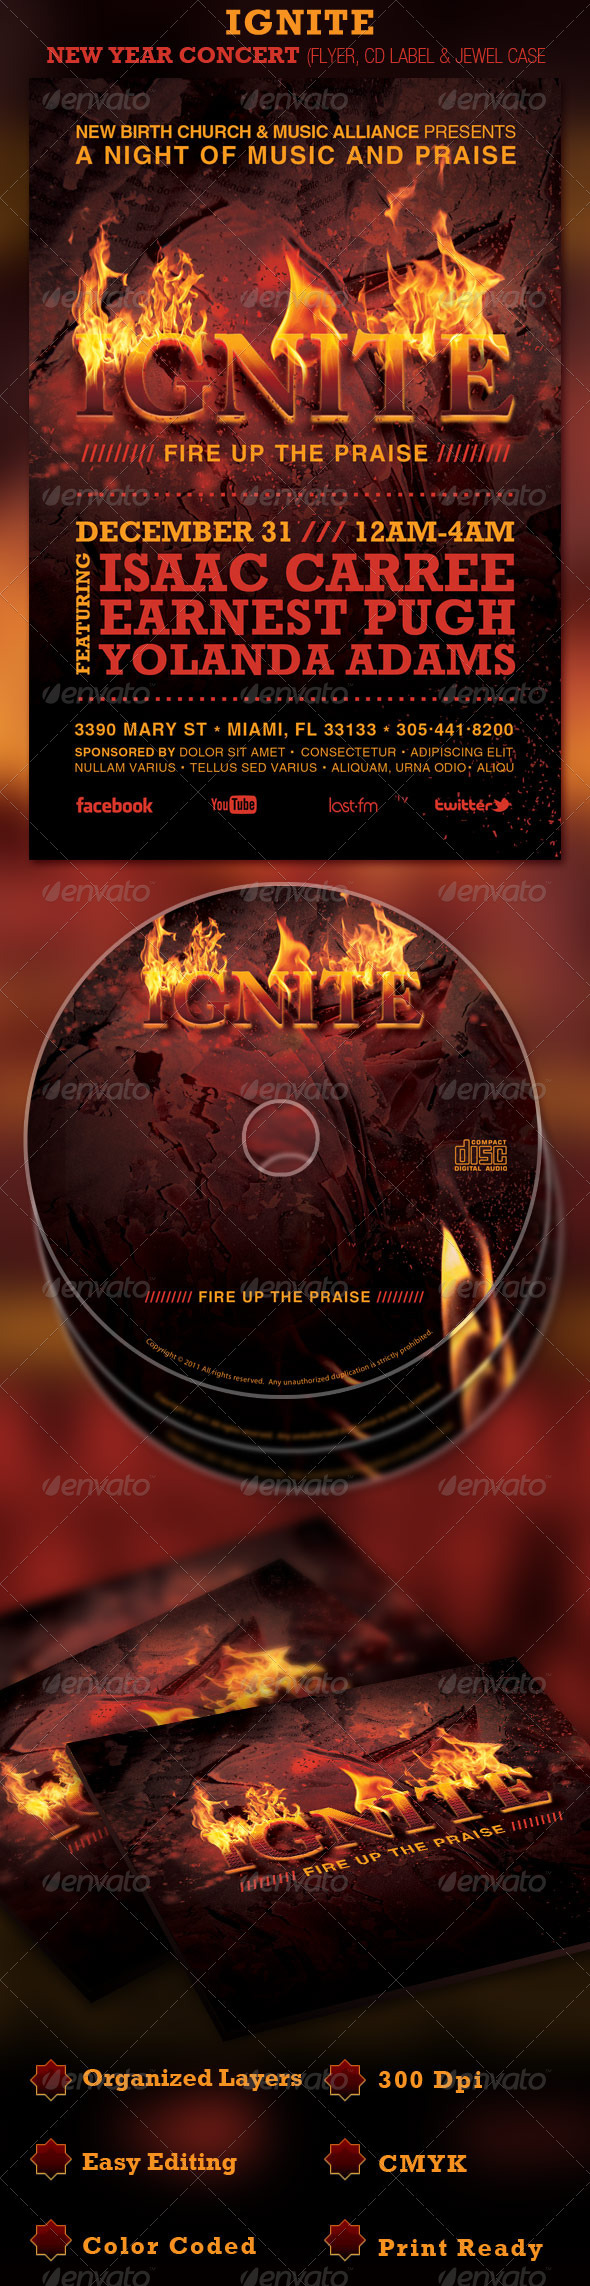 Ignite Church Flyer and CD Template